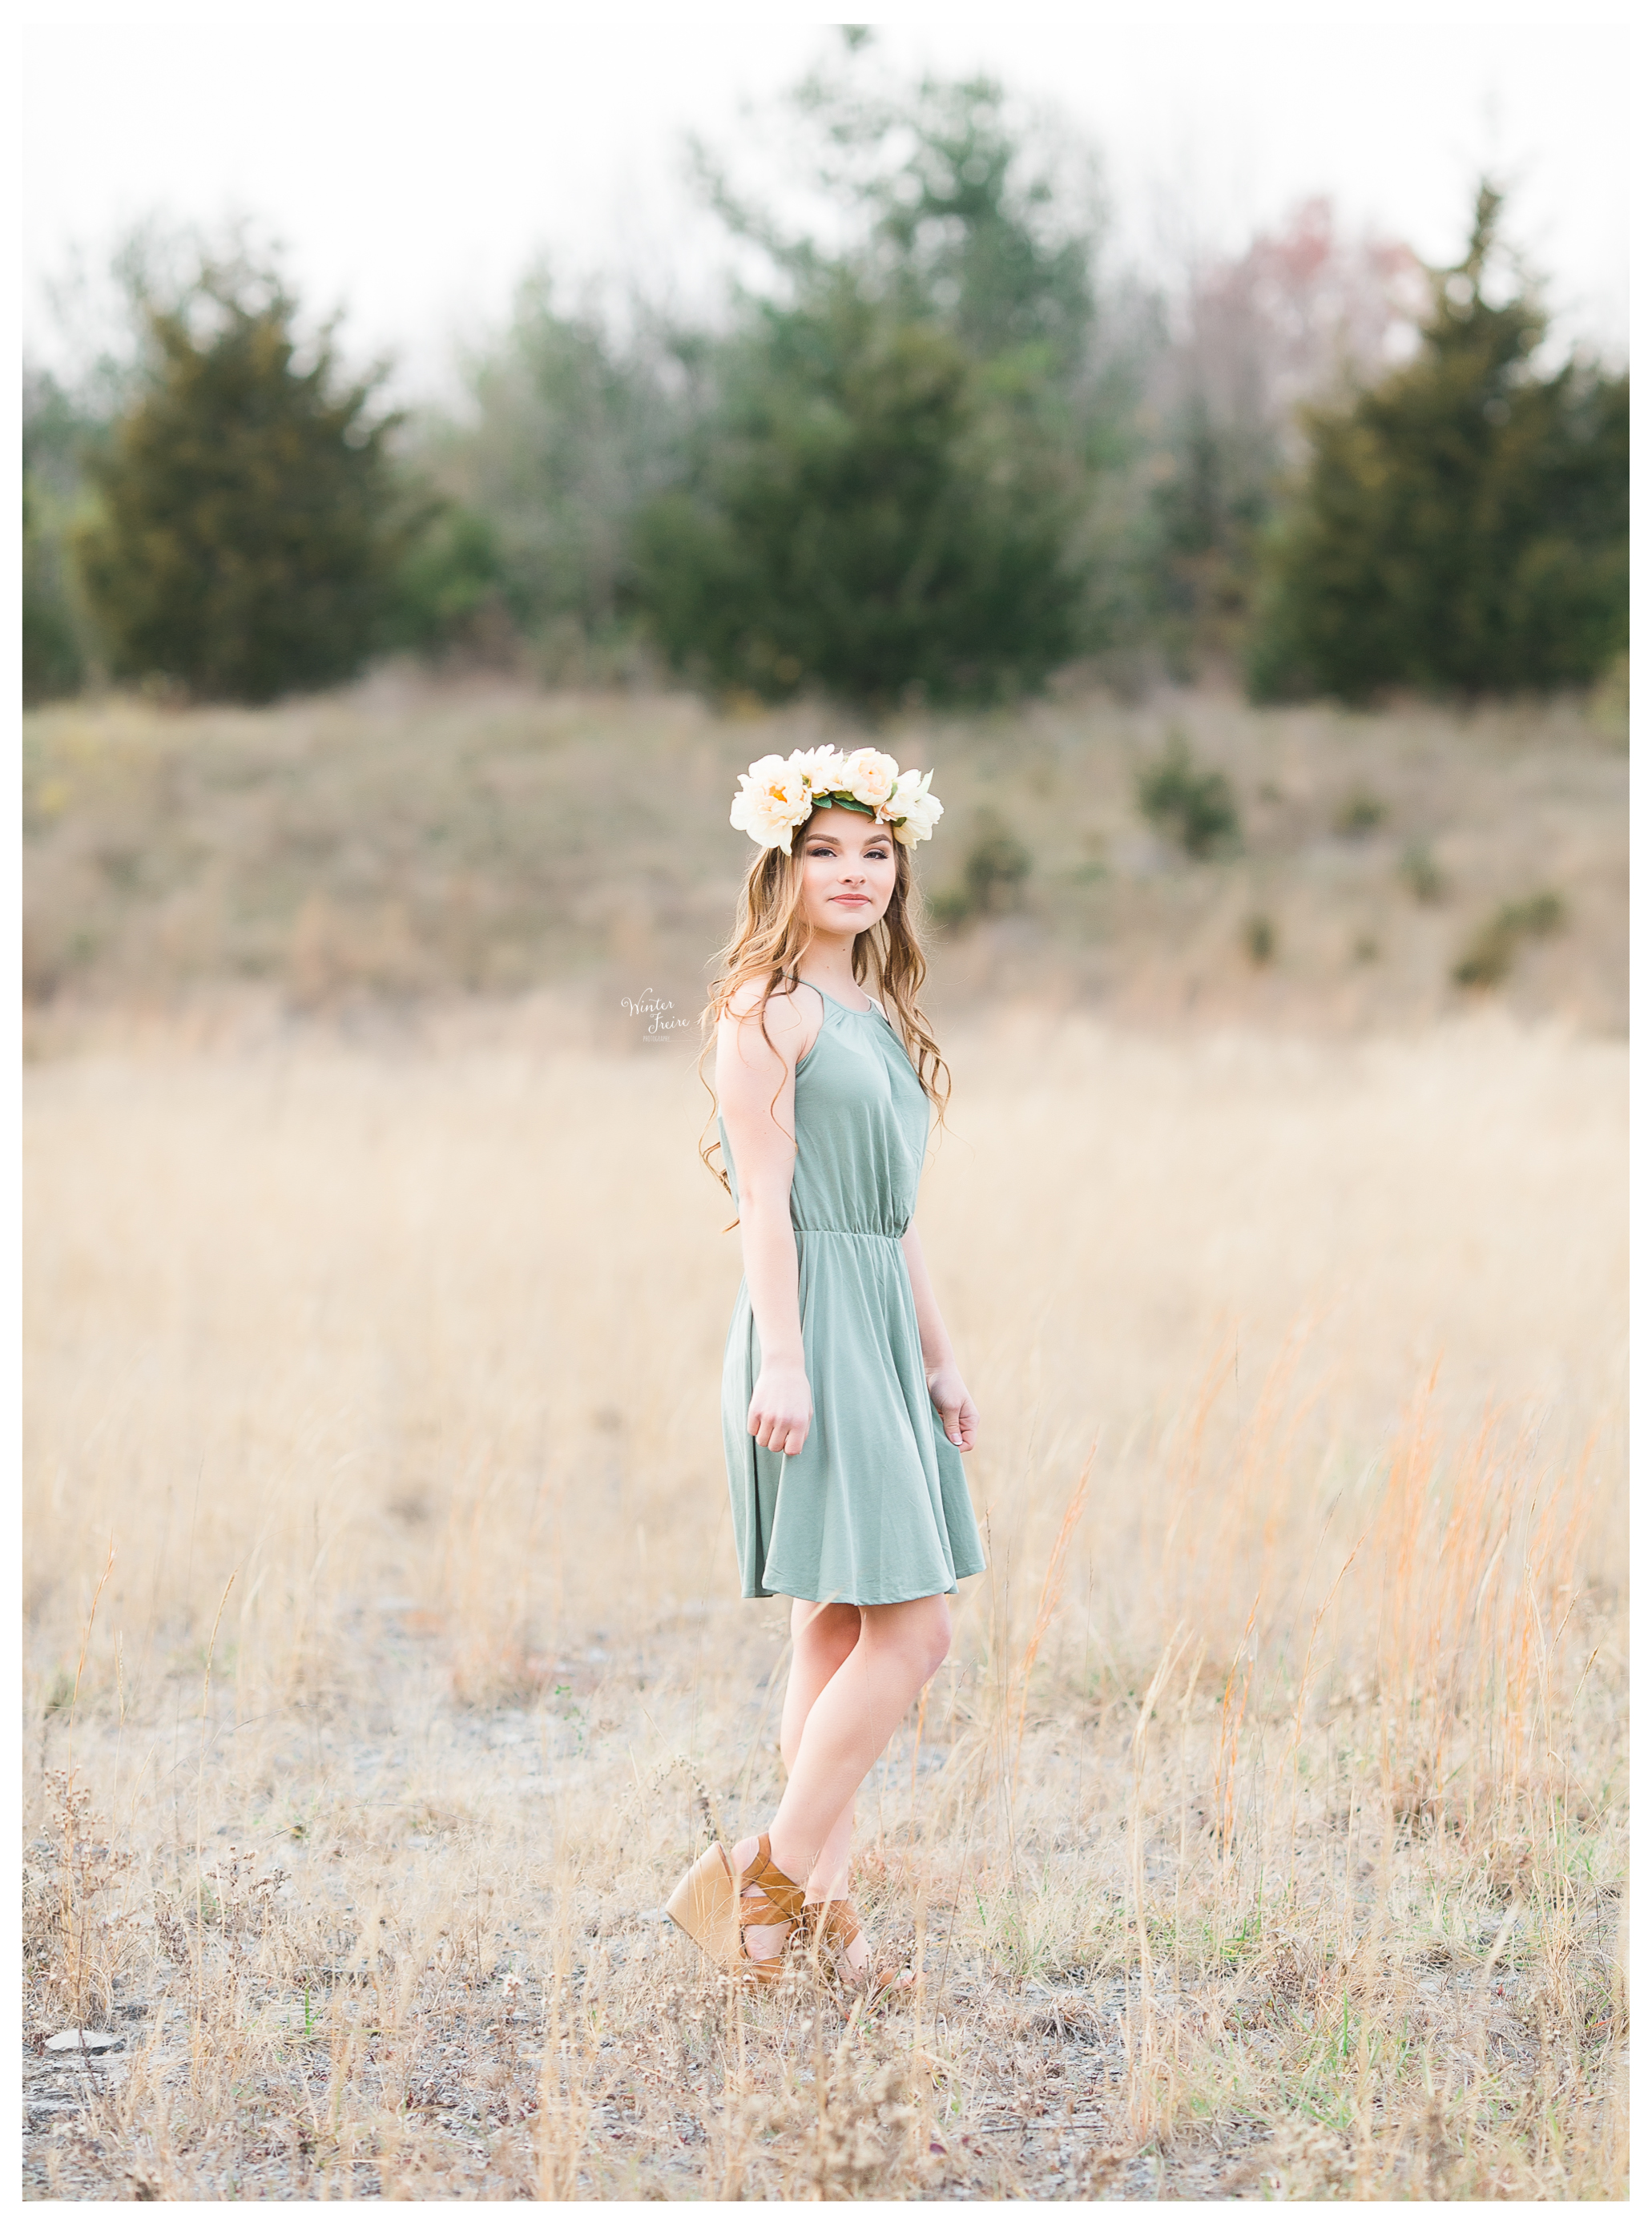 Winter Freire Photography | Sweet Pure Organic | Fine Art Senior Photography | Styled Senior Photography | Dayton, Ohio Photographer | Lovely by Winter Freire Photography